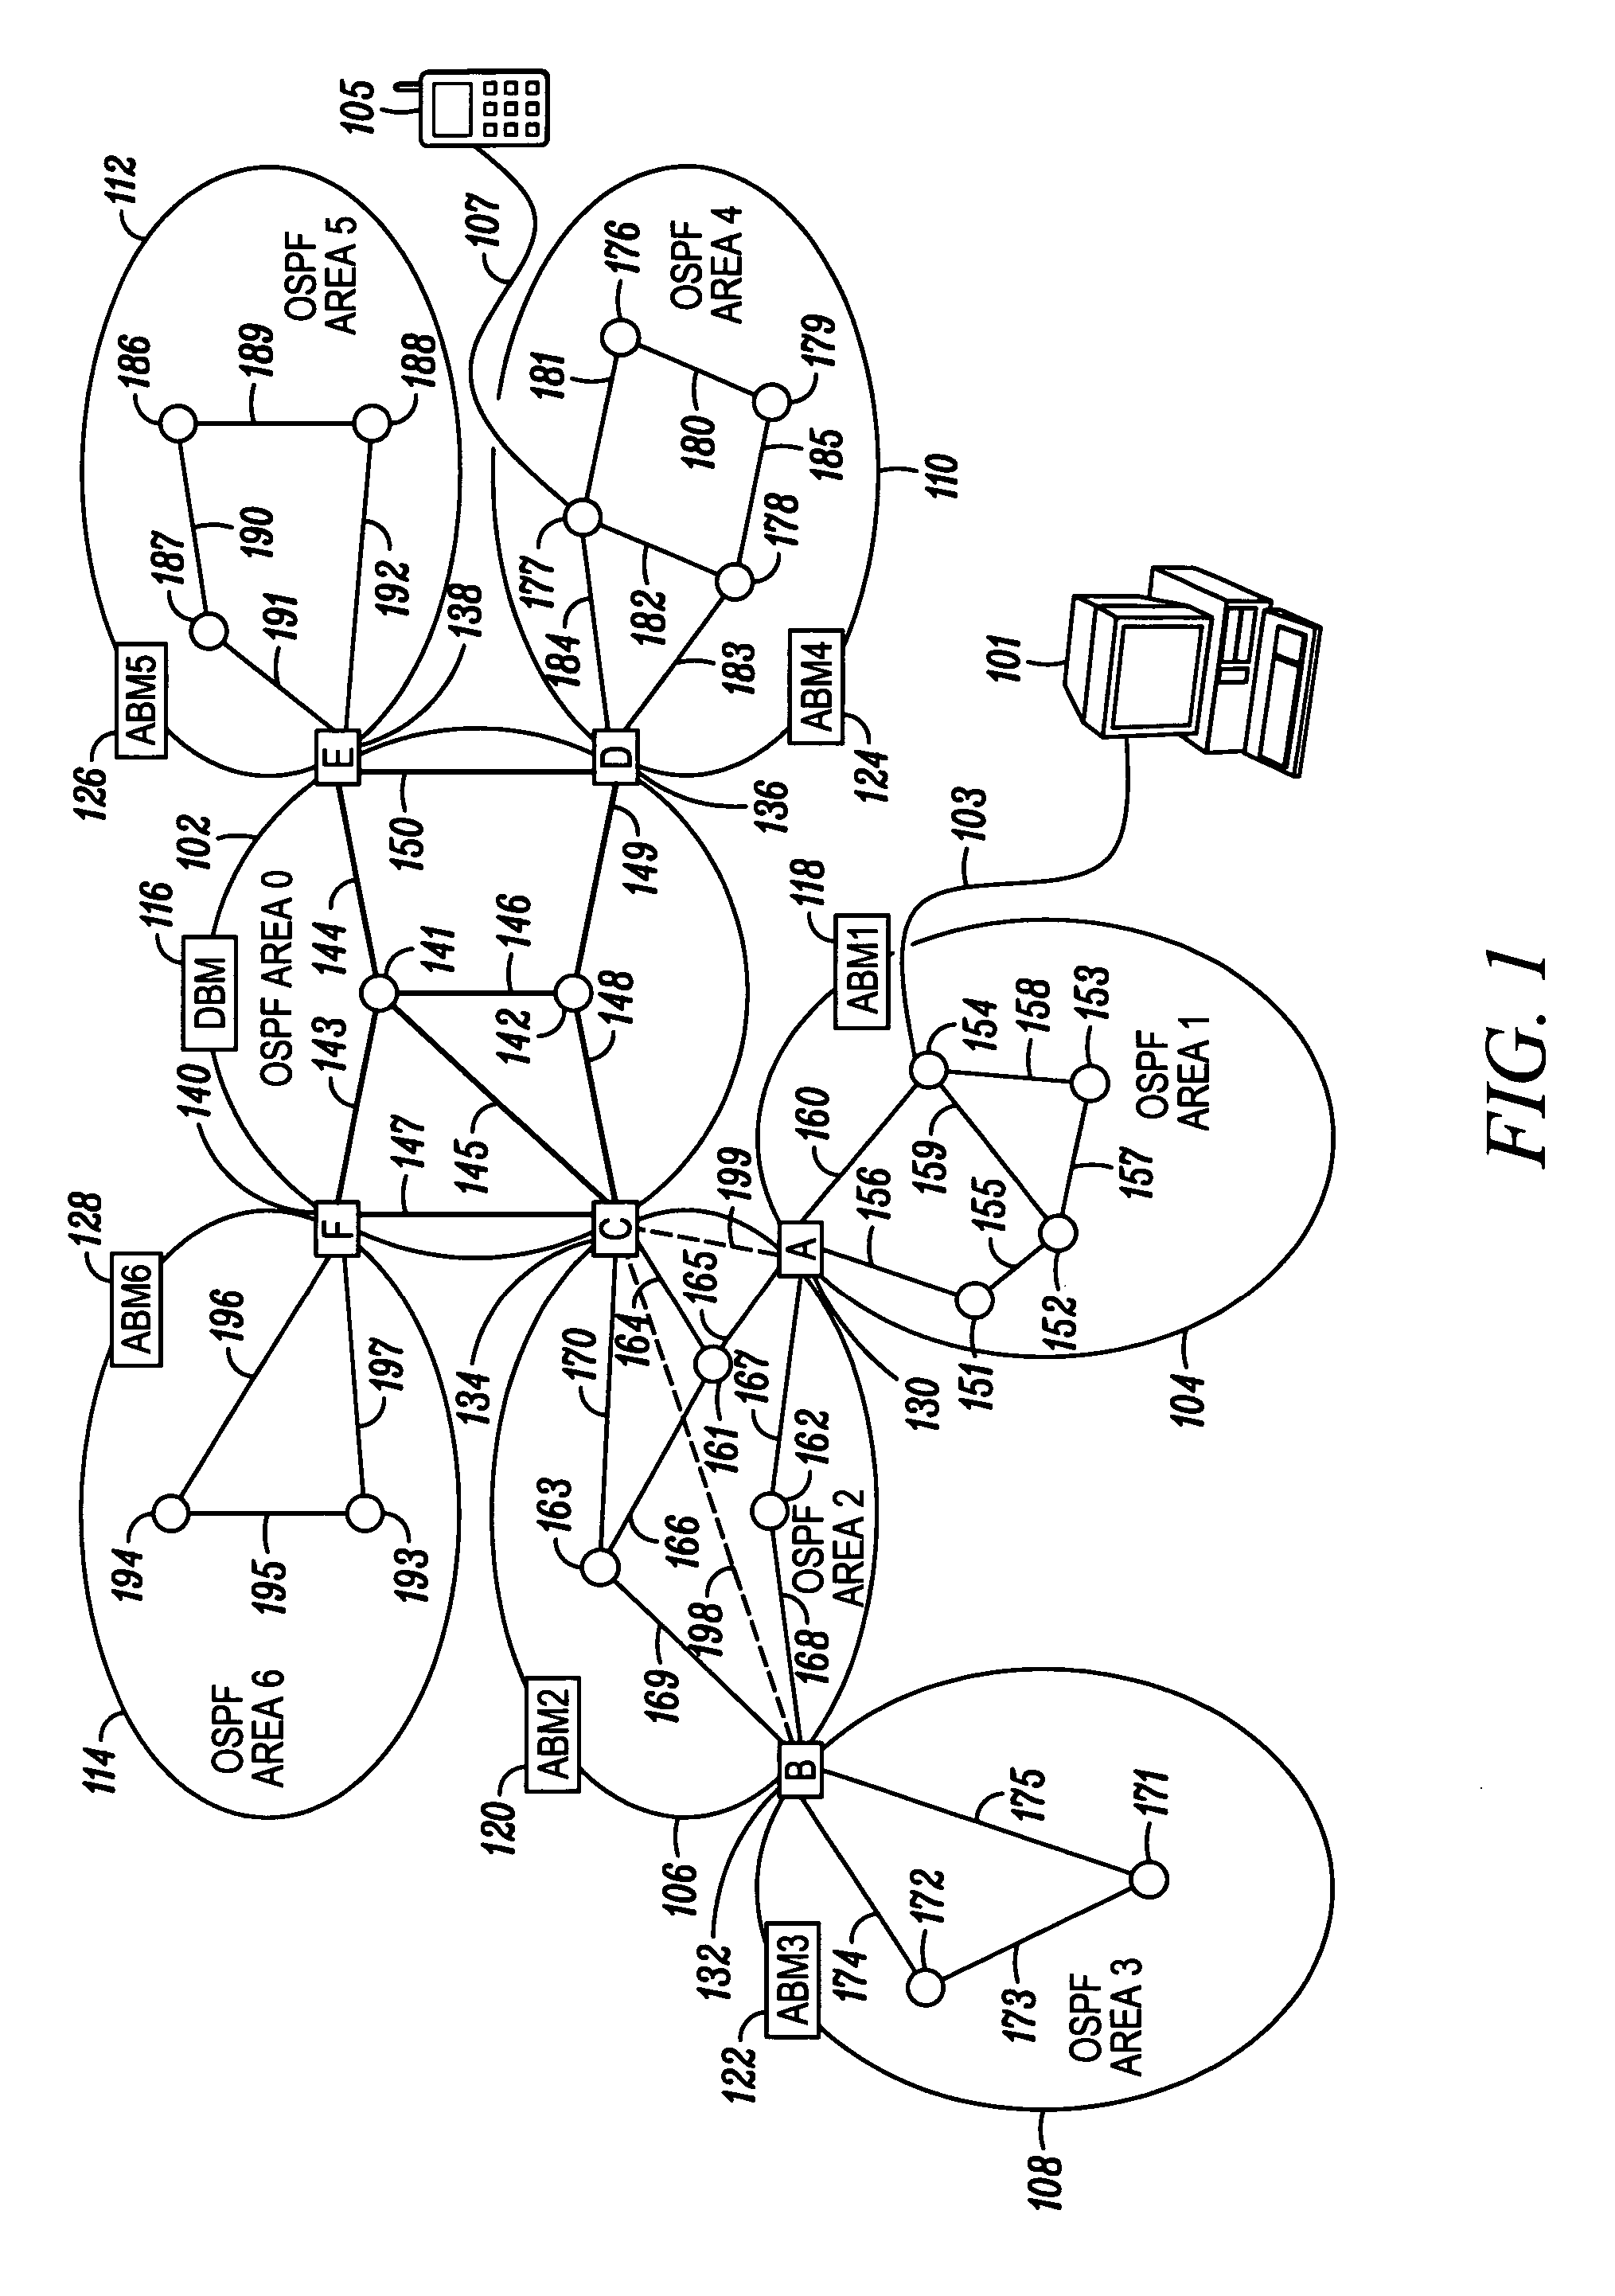 Routing topology bandwidth management methods and system